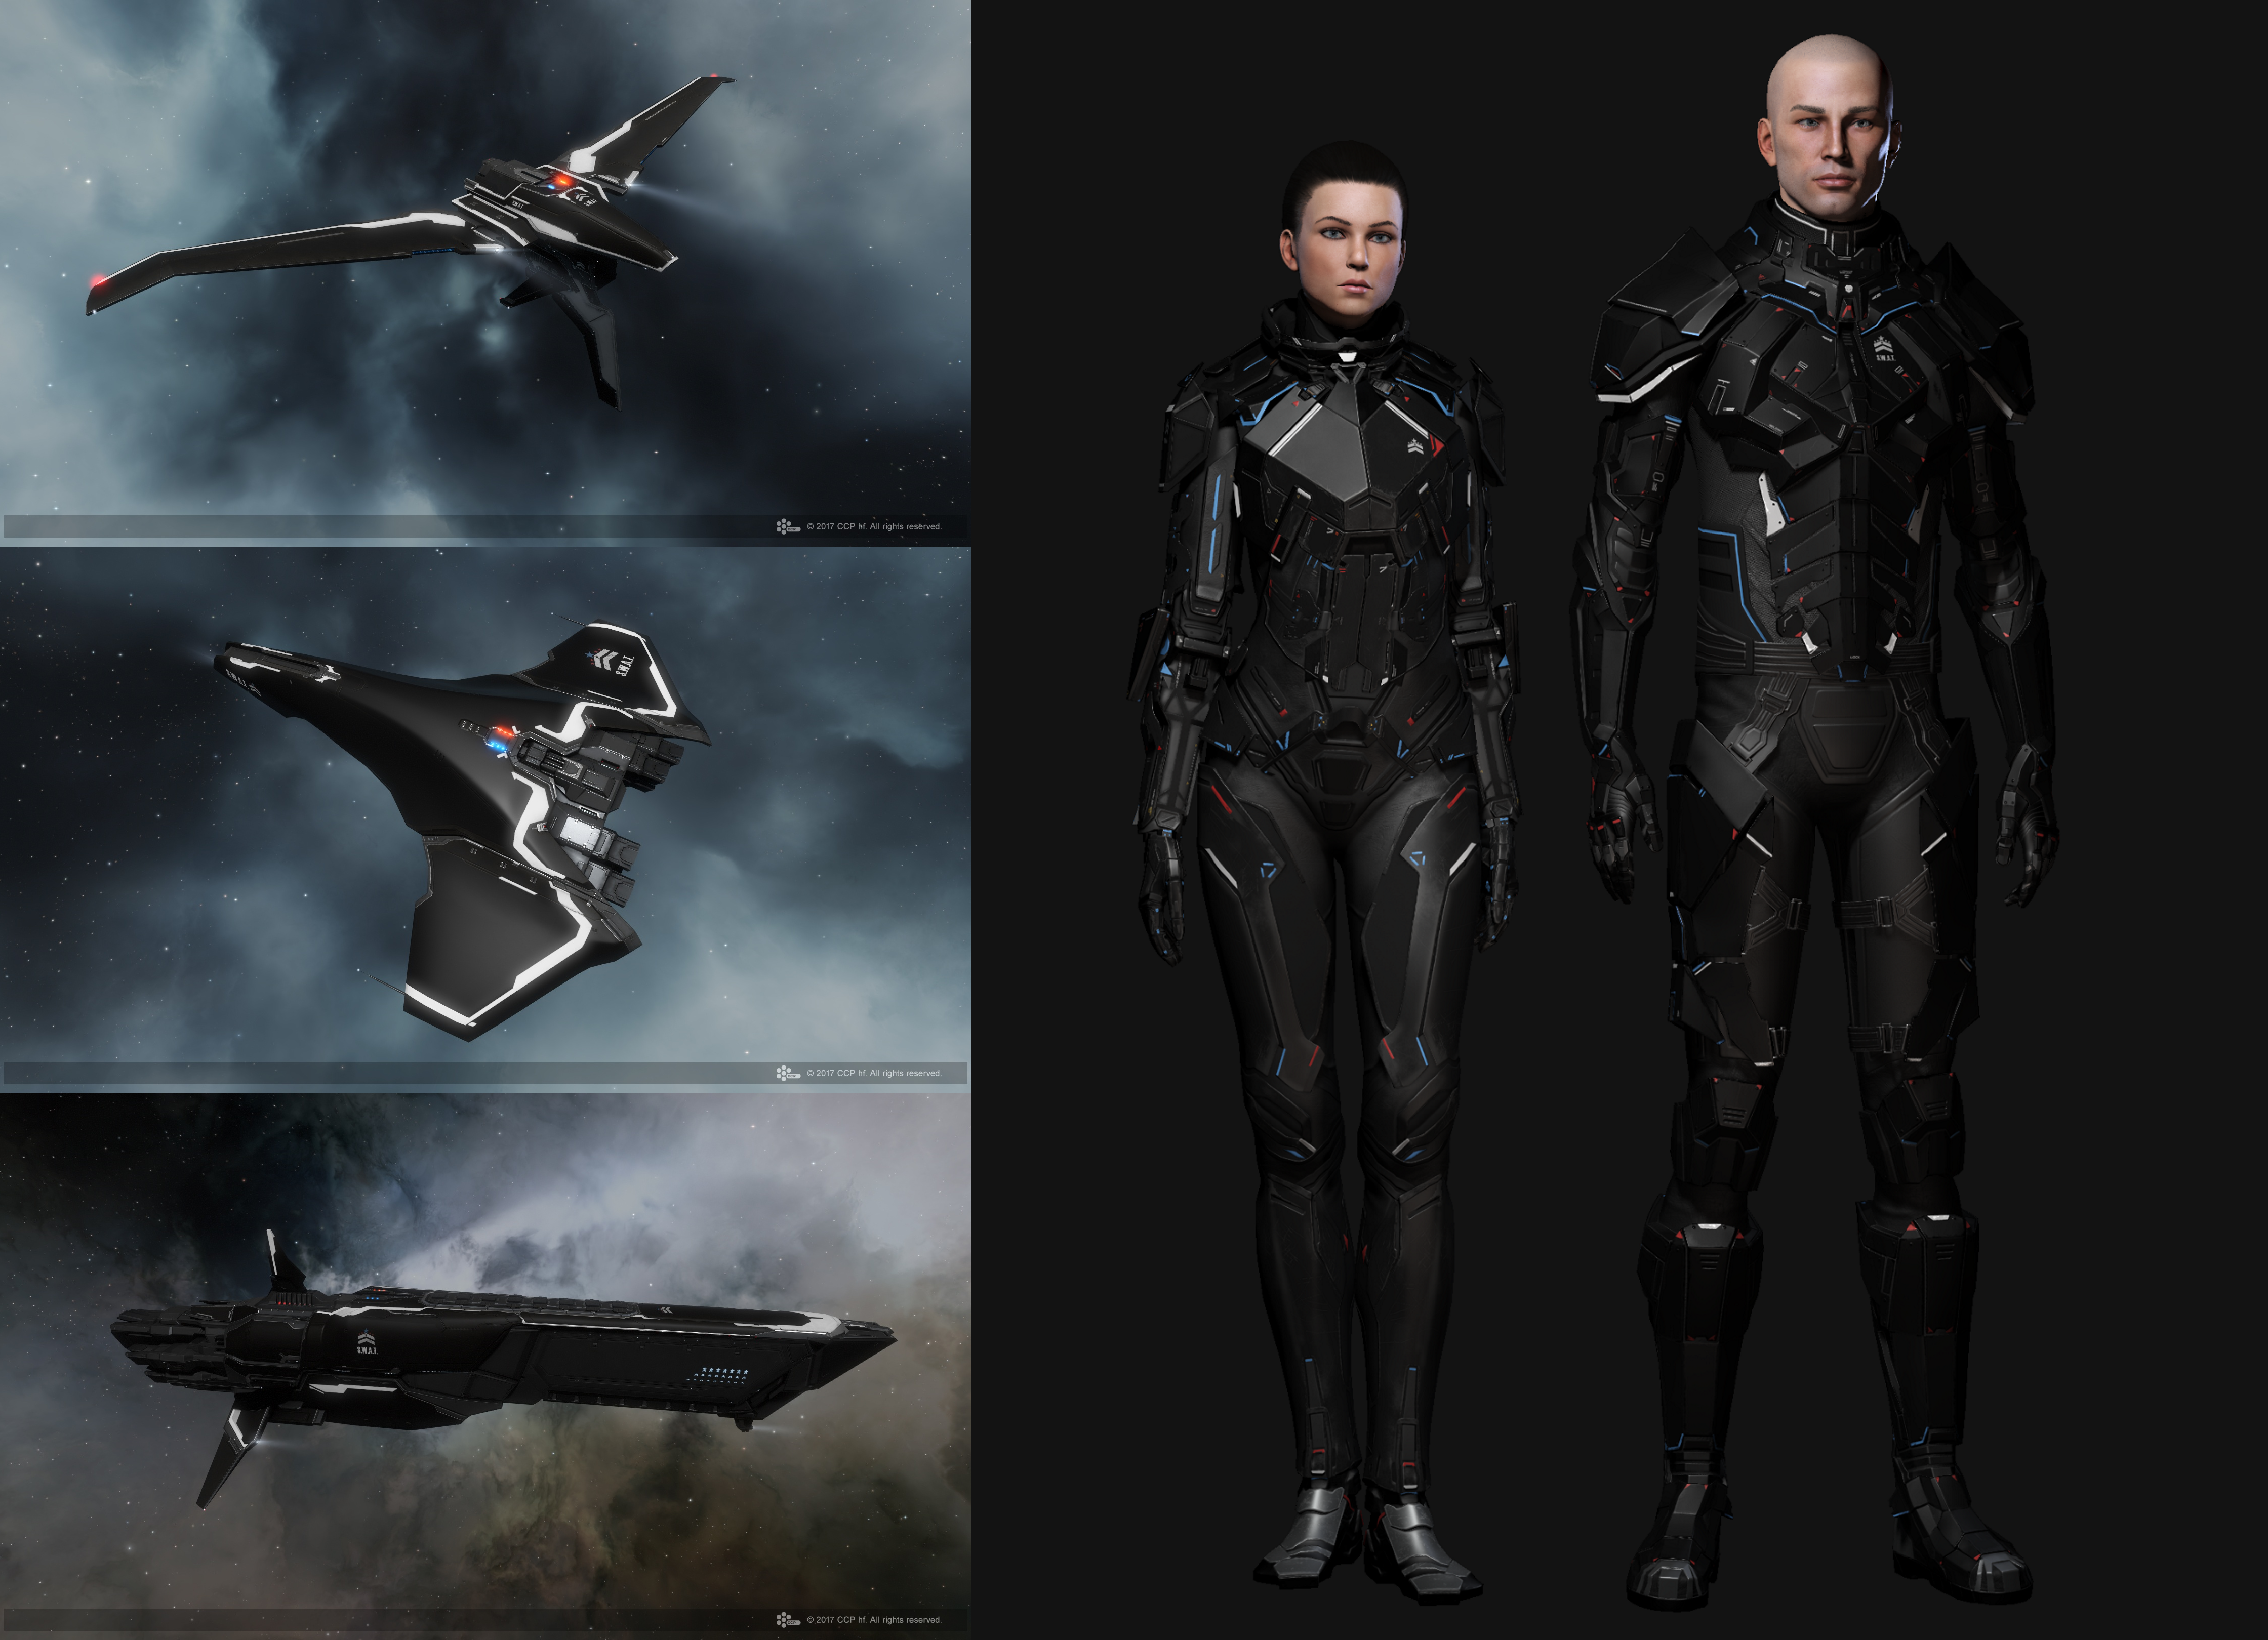 CONCORD SARO SKINs & Combat Suits Gifted To Mystery Code Holders!